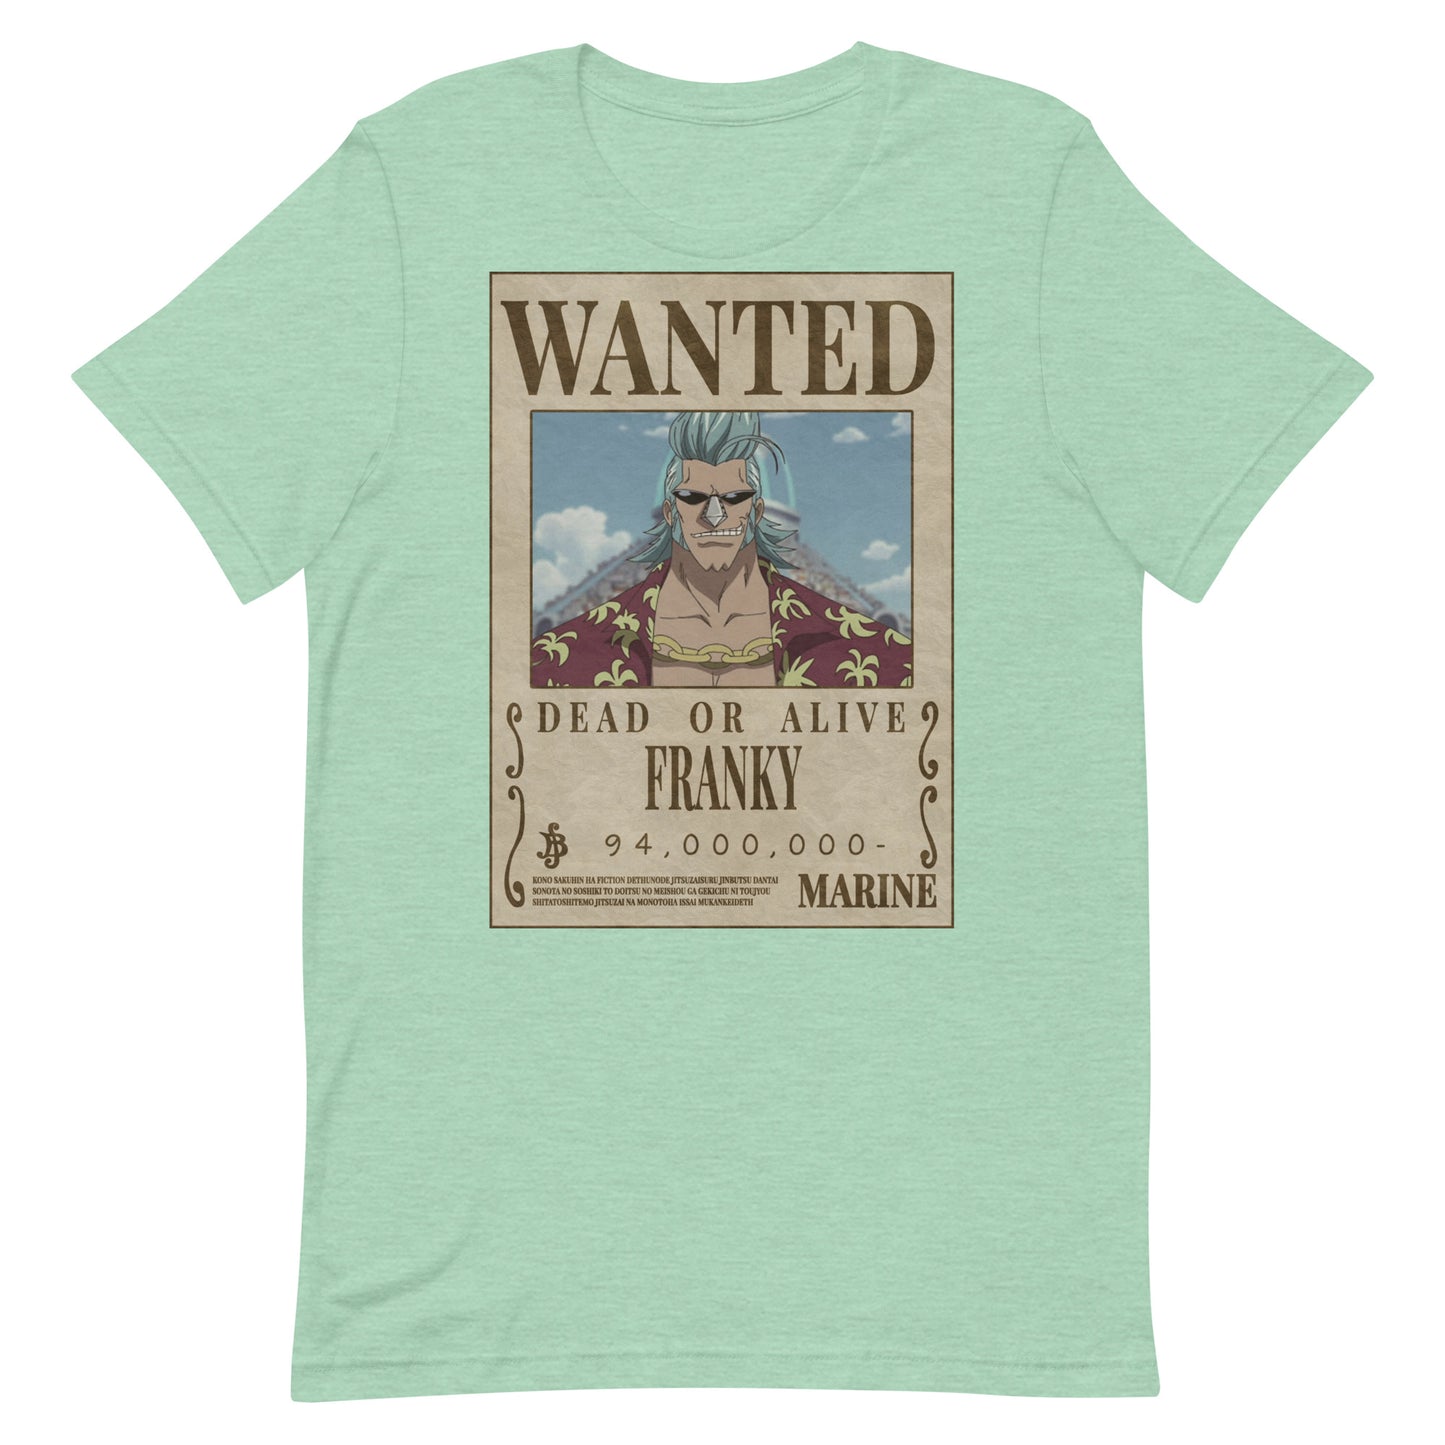 Franky Wanted Poster T Shirt